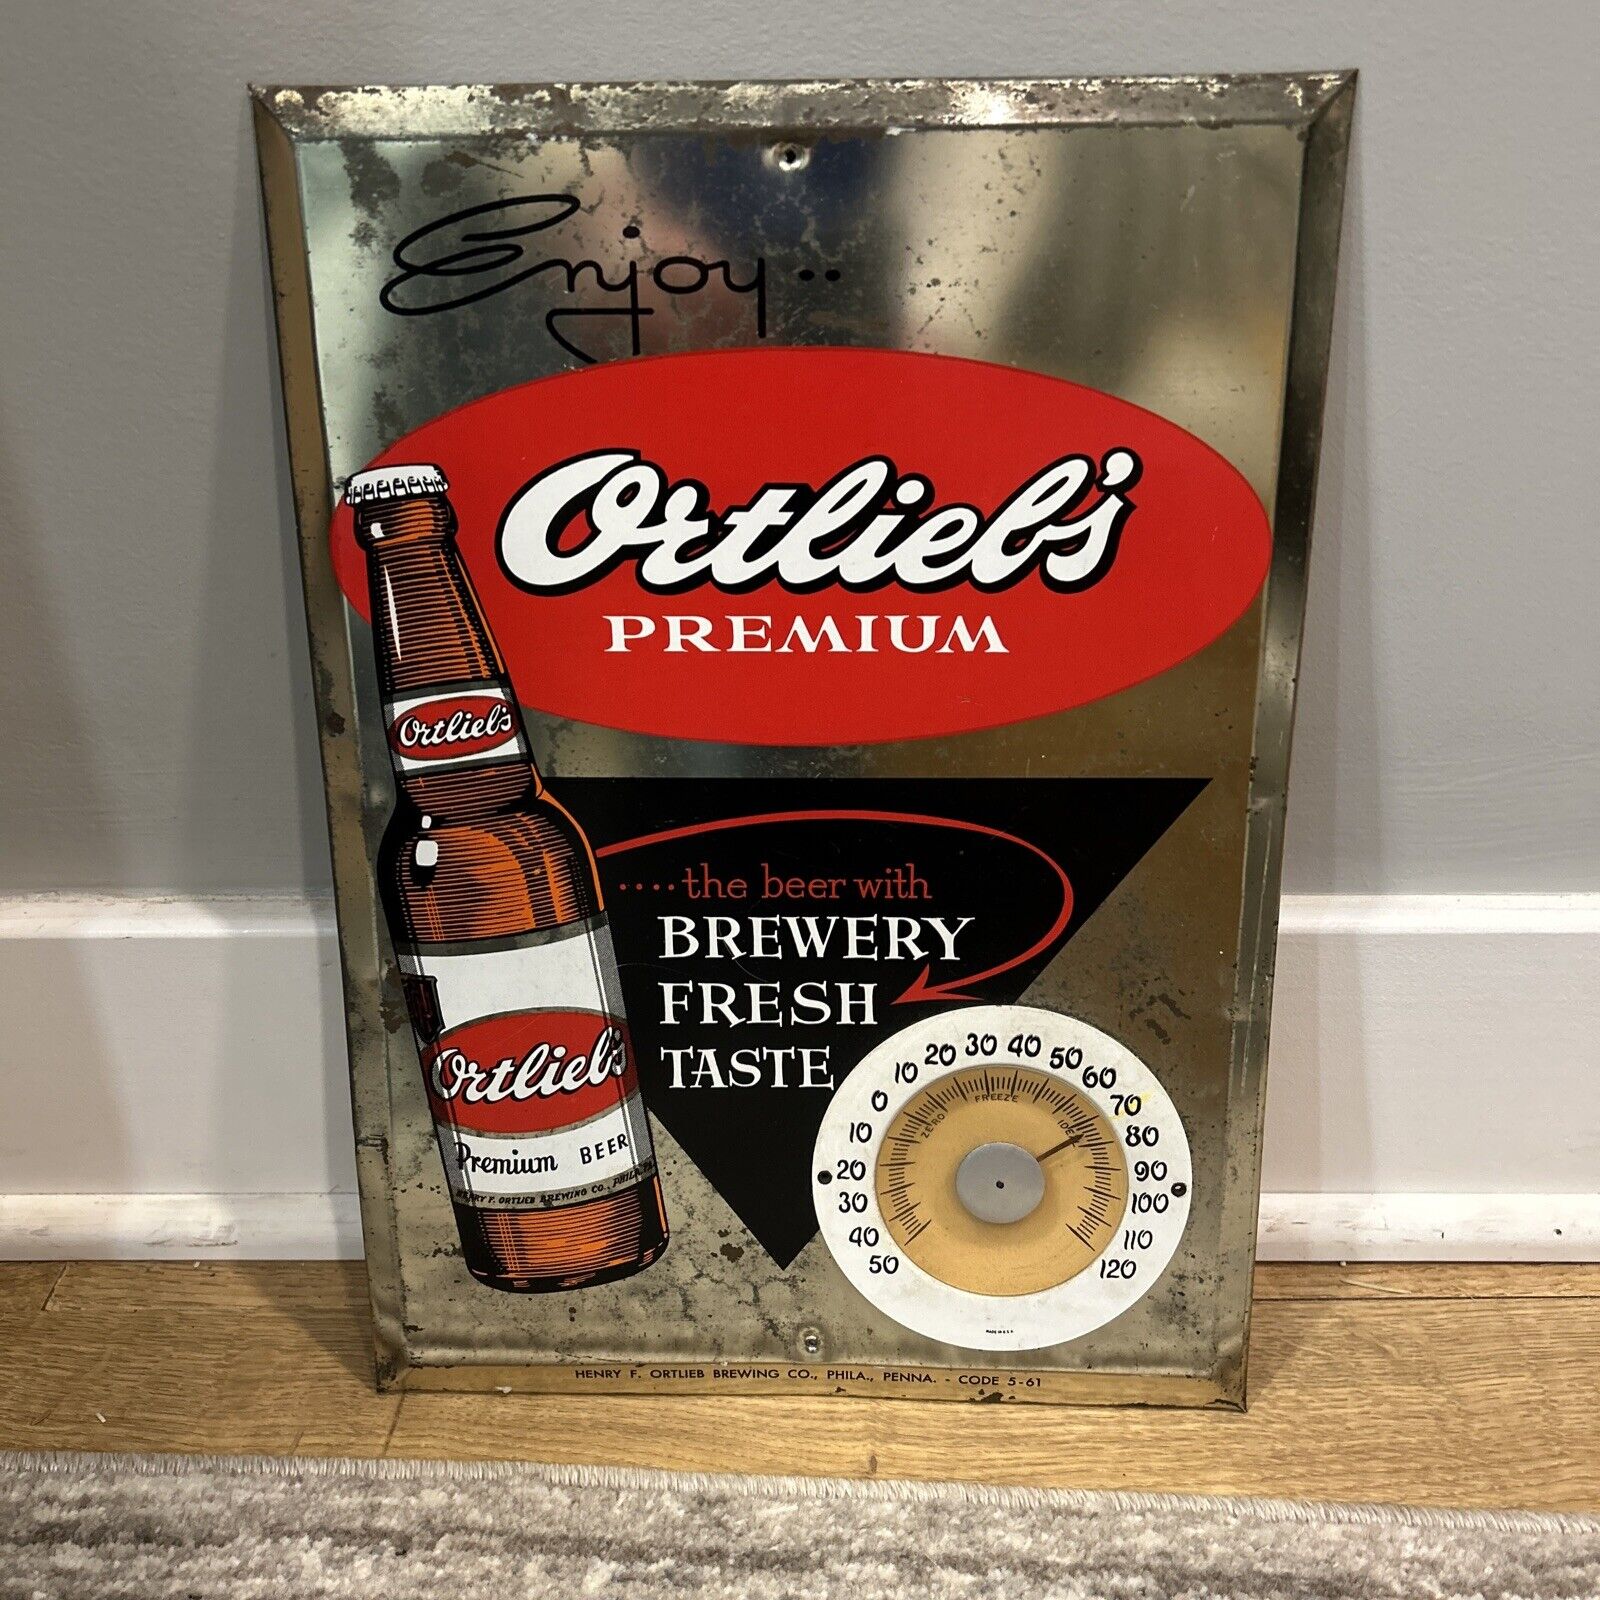 Vintage 60’s Ortlieb’s Premium Beer Advertising Sign With Working Thermometer